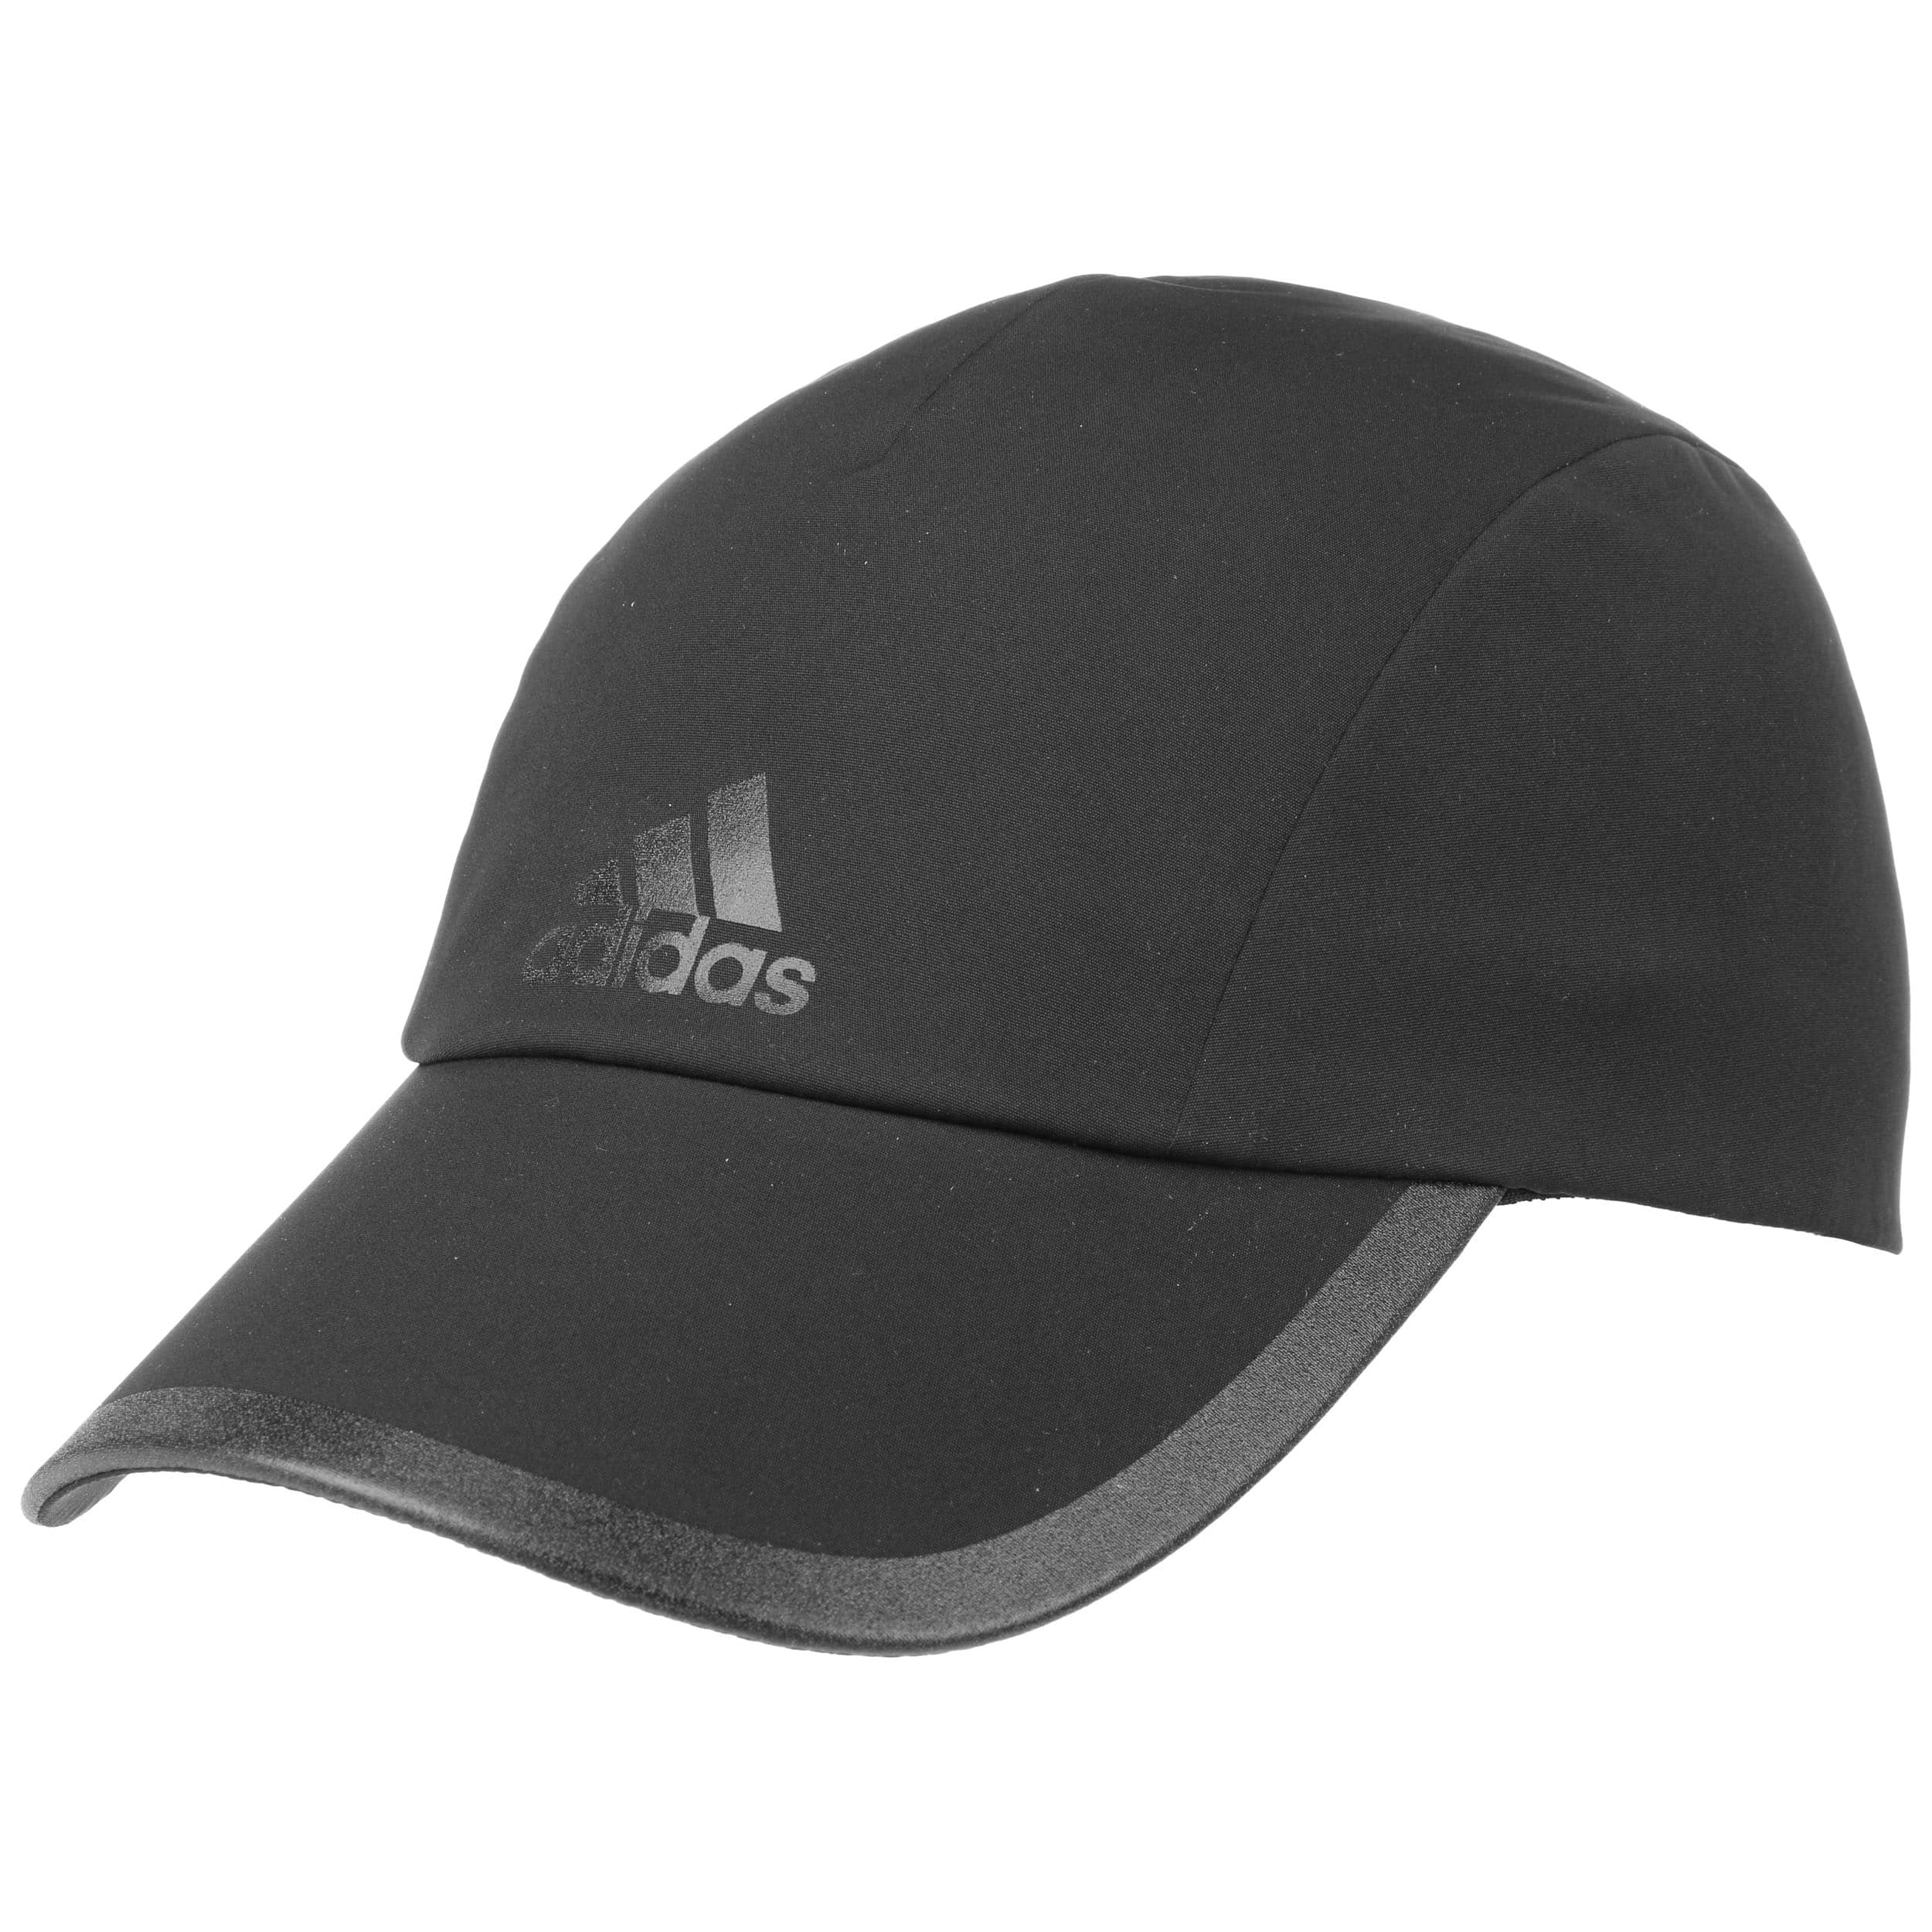 Climaproof Cap by adidas €